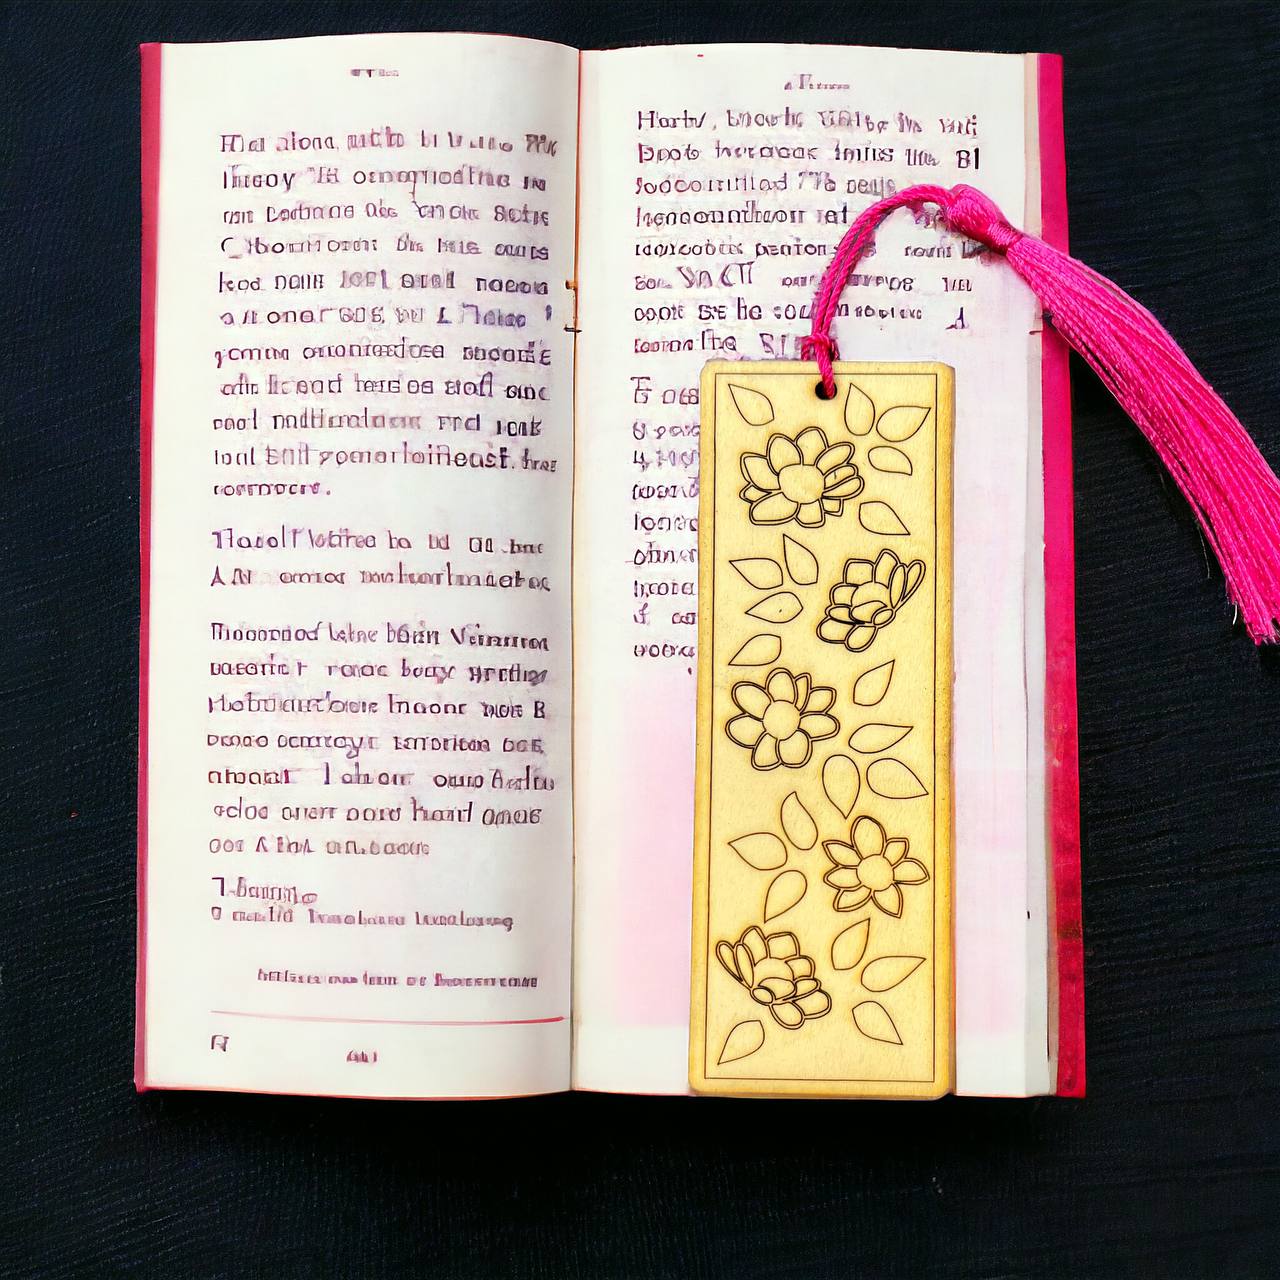 Daisy and leave Book Mark